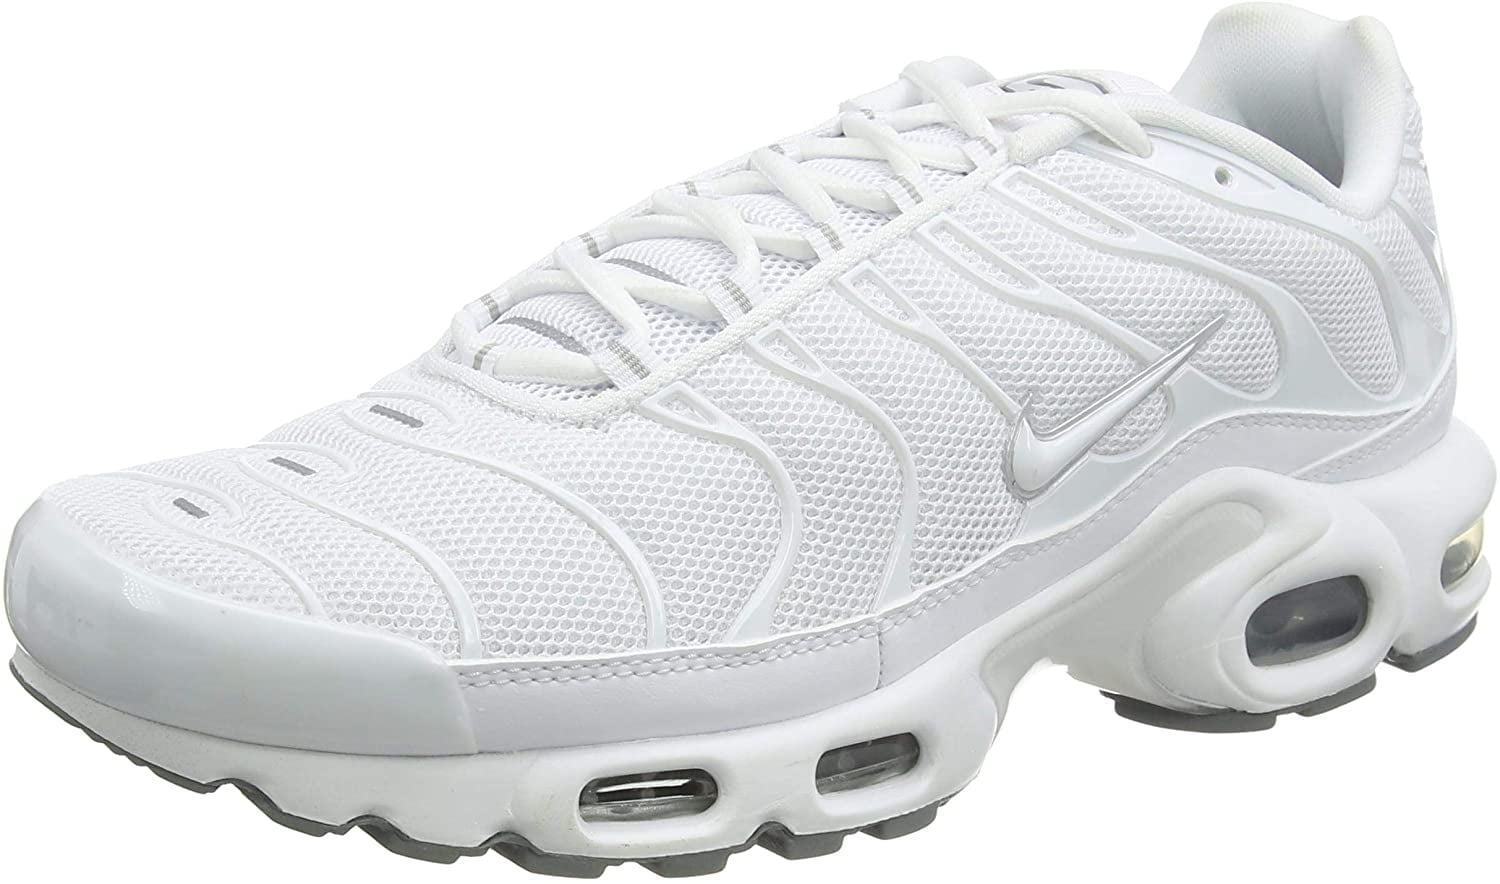 Strong wind Insignificant Remains nike air max plus - men's - Walmart.com